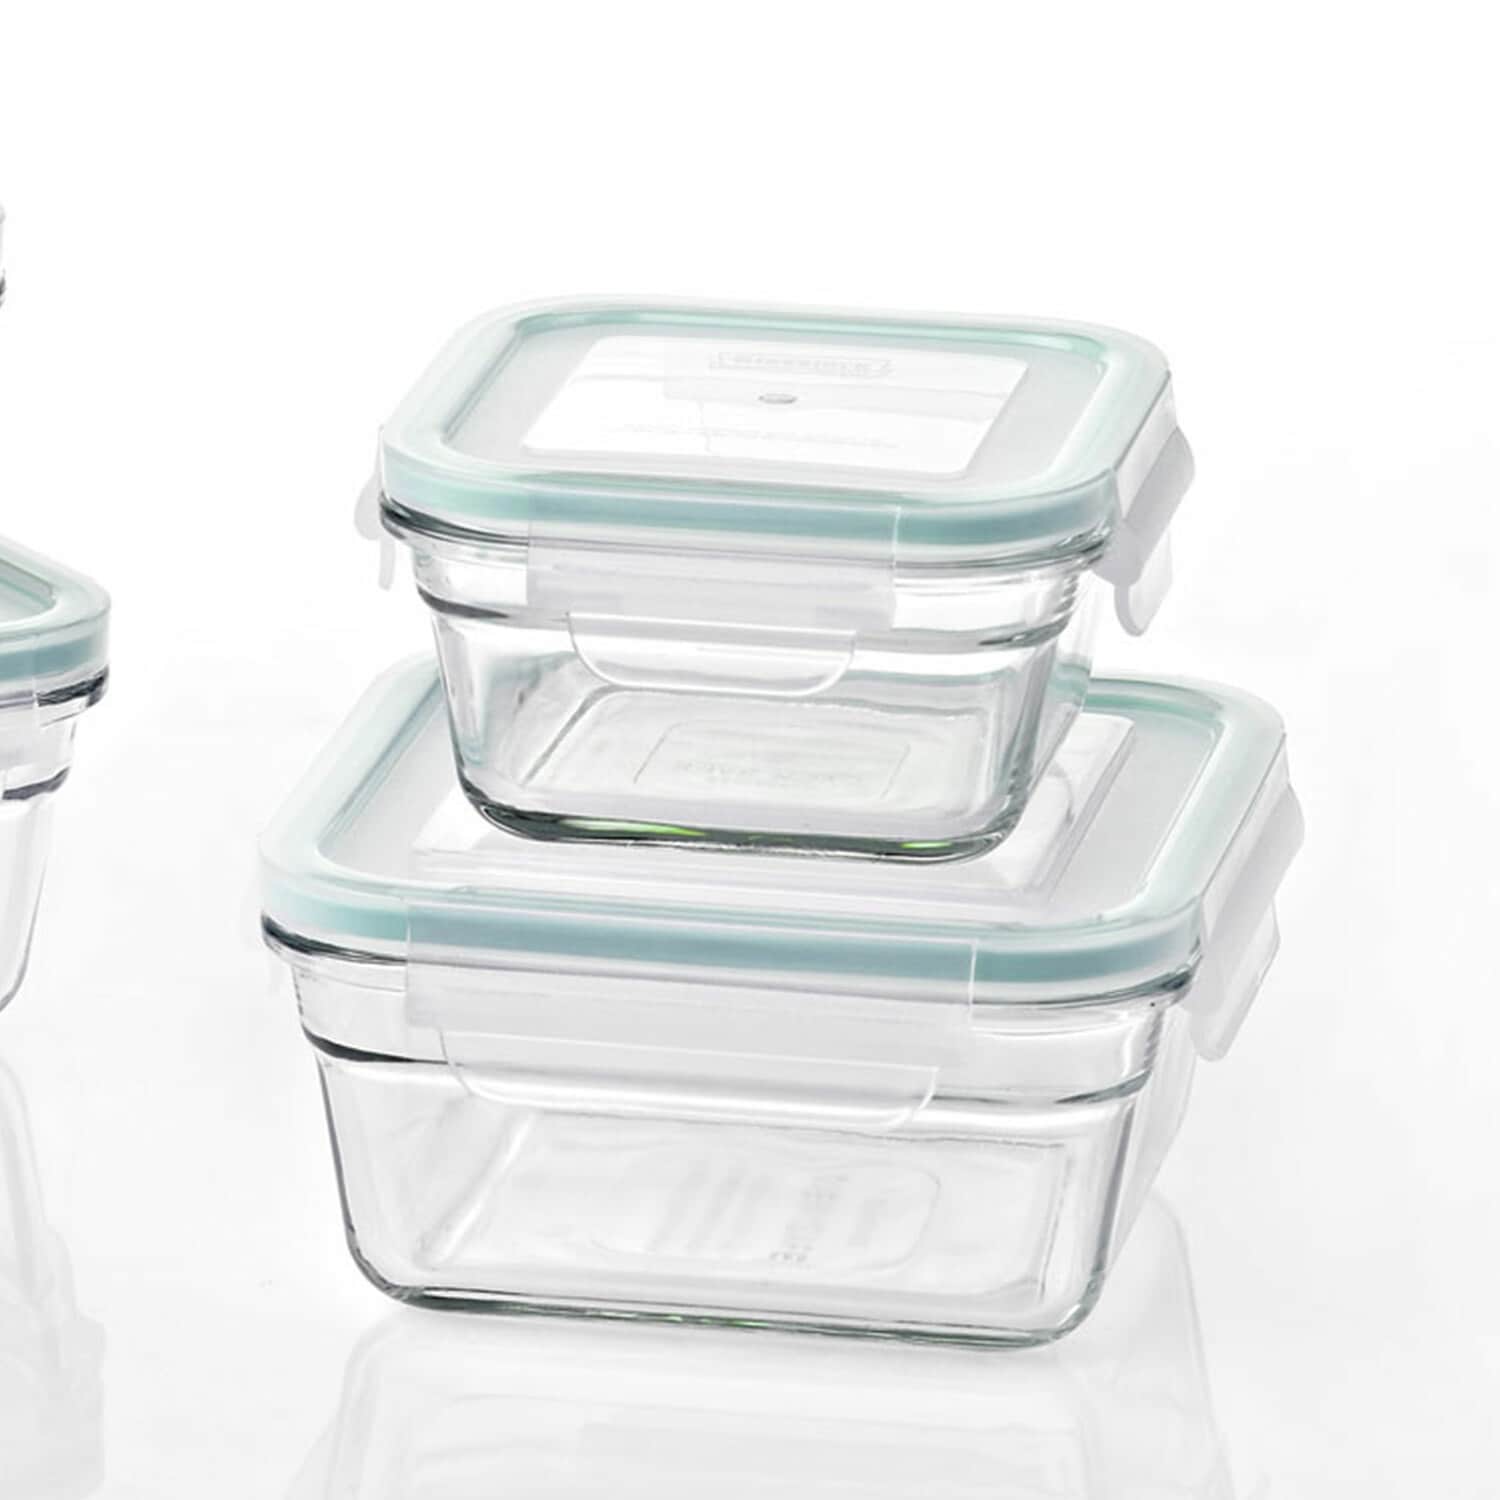 Glasslock 28-Pack Multisize Glass Bpa-free Reusable Food Storage